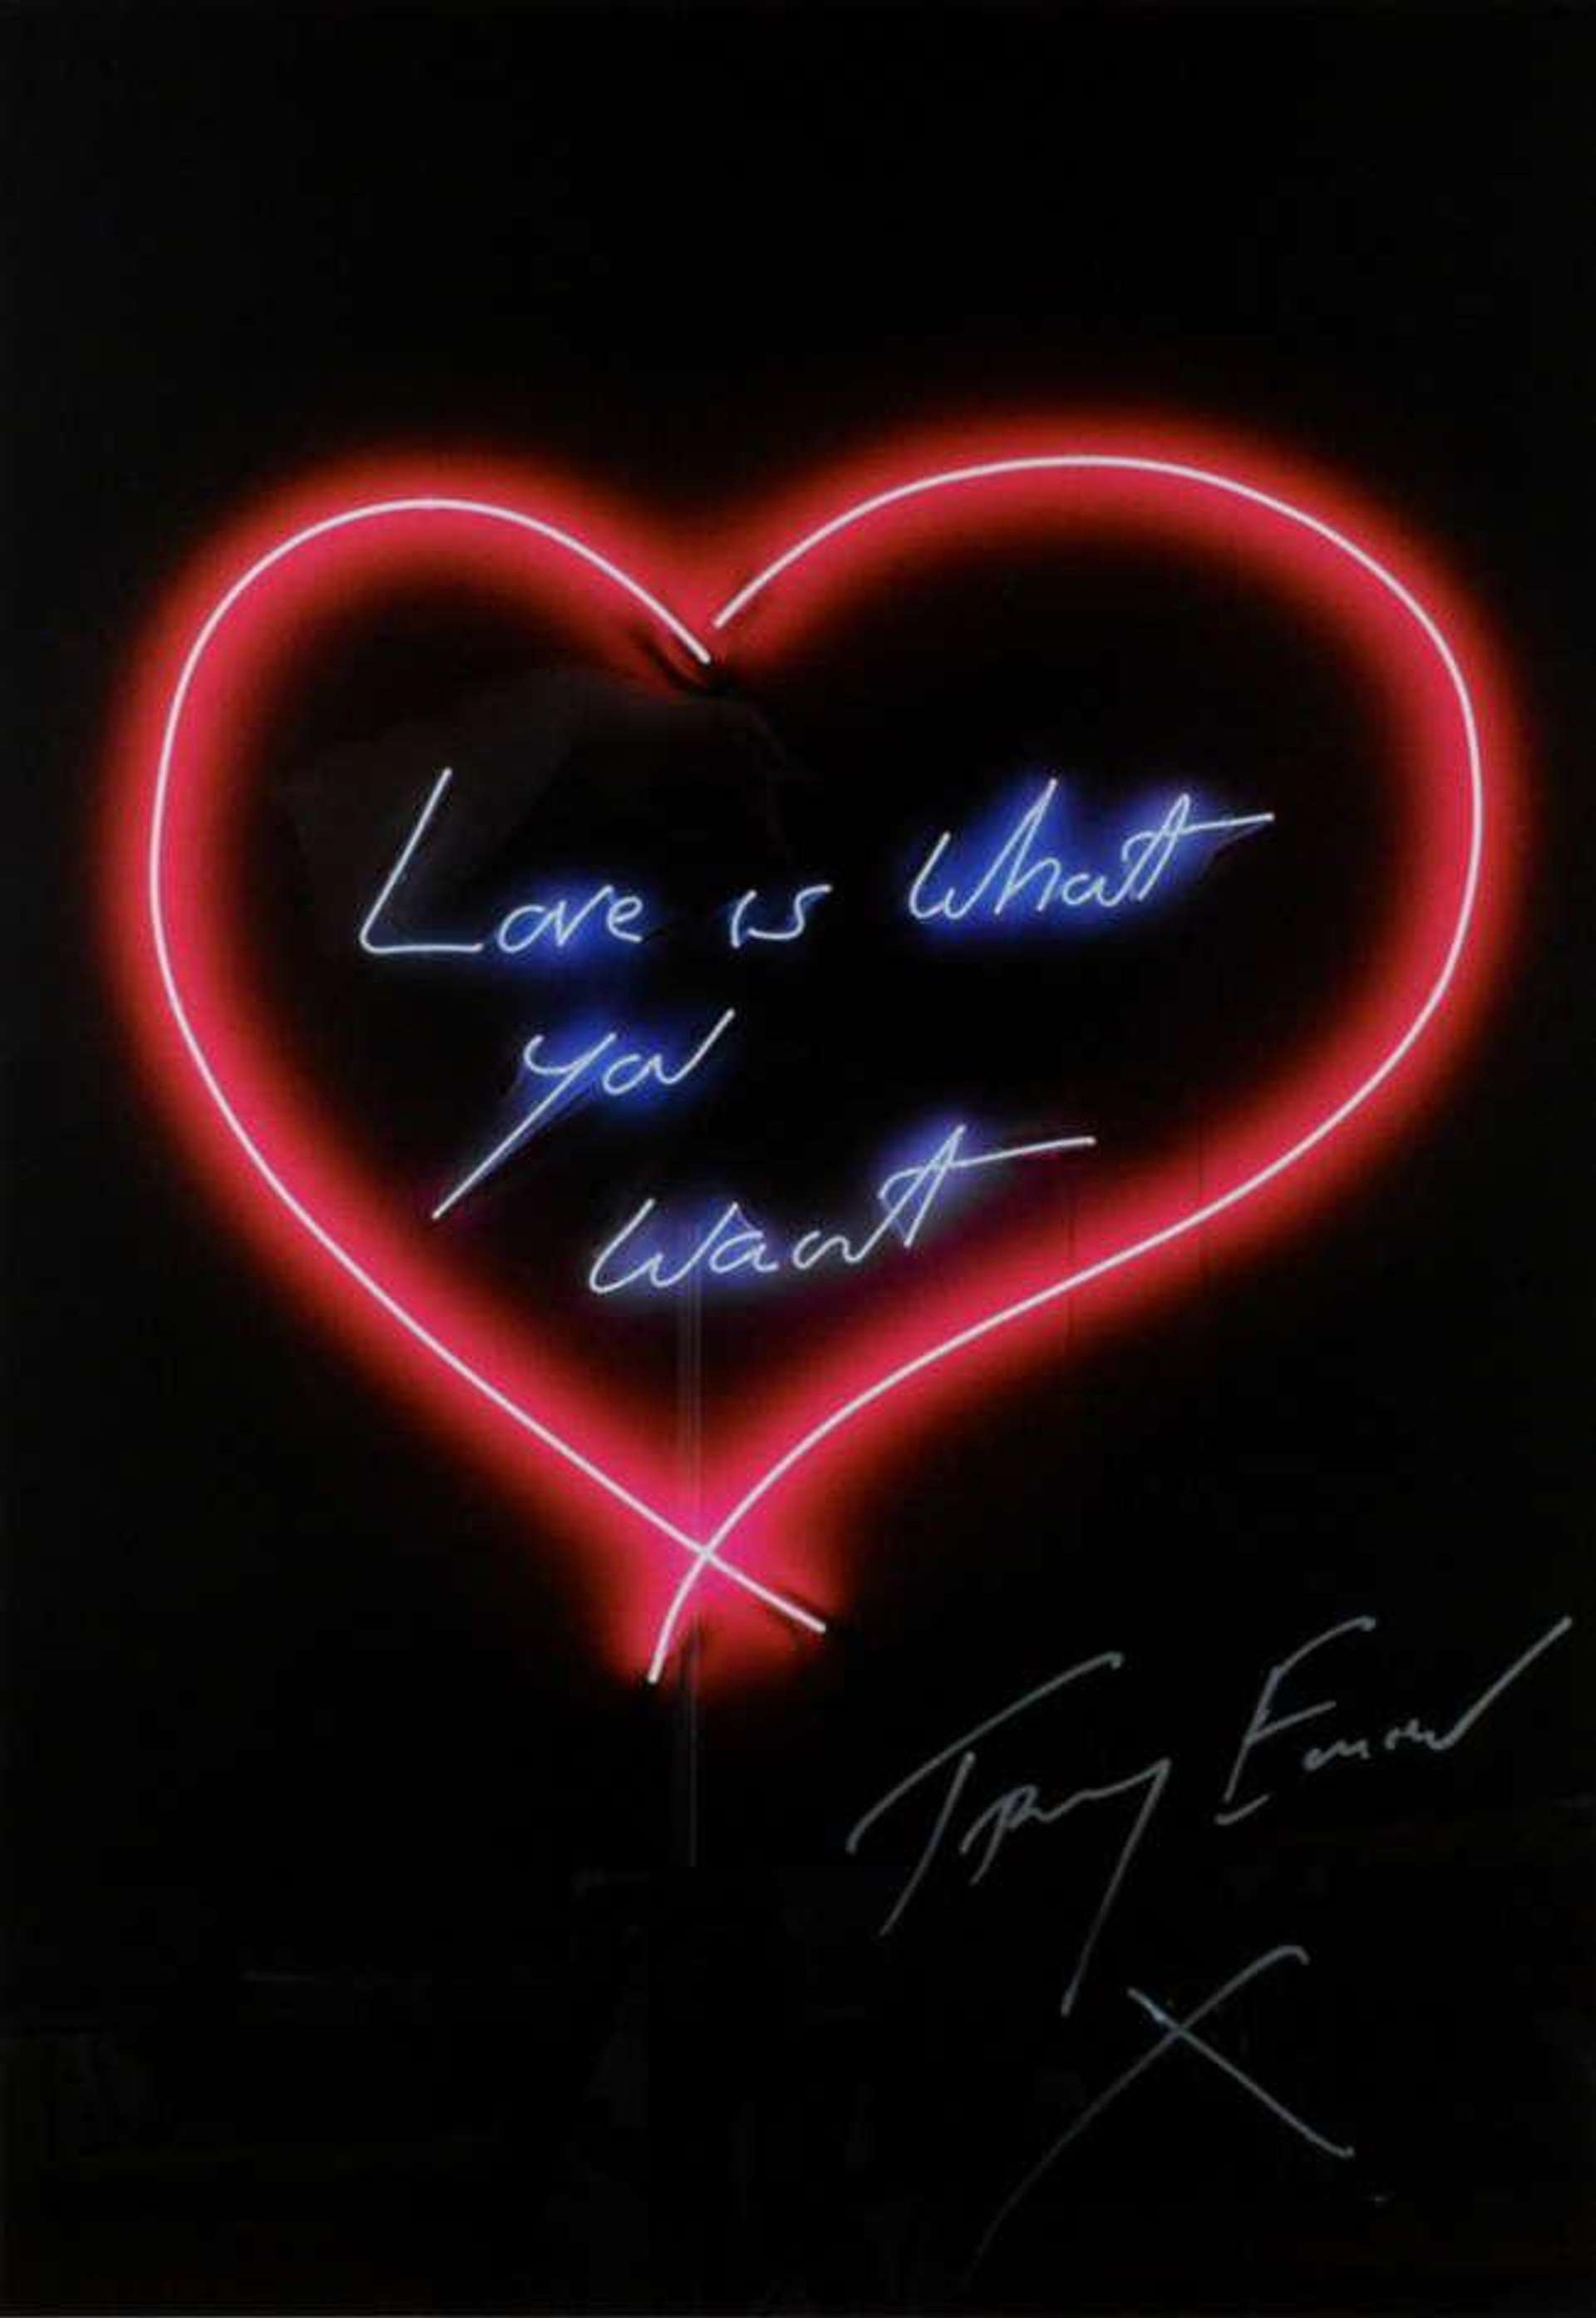 Love Is What You Want by Tracey Emin